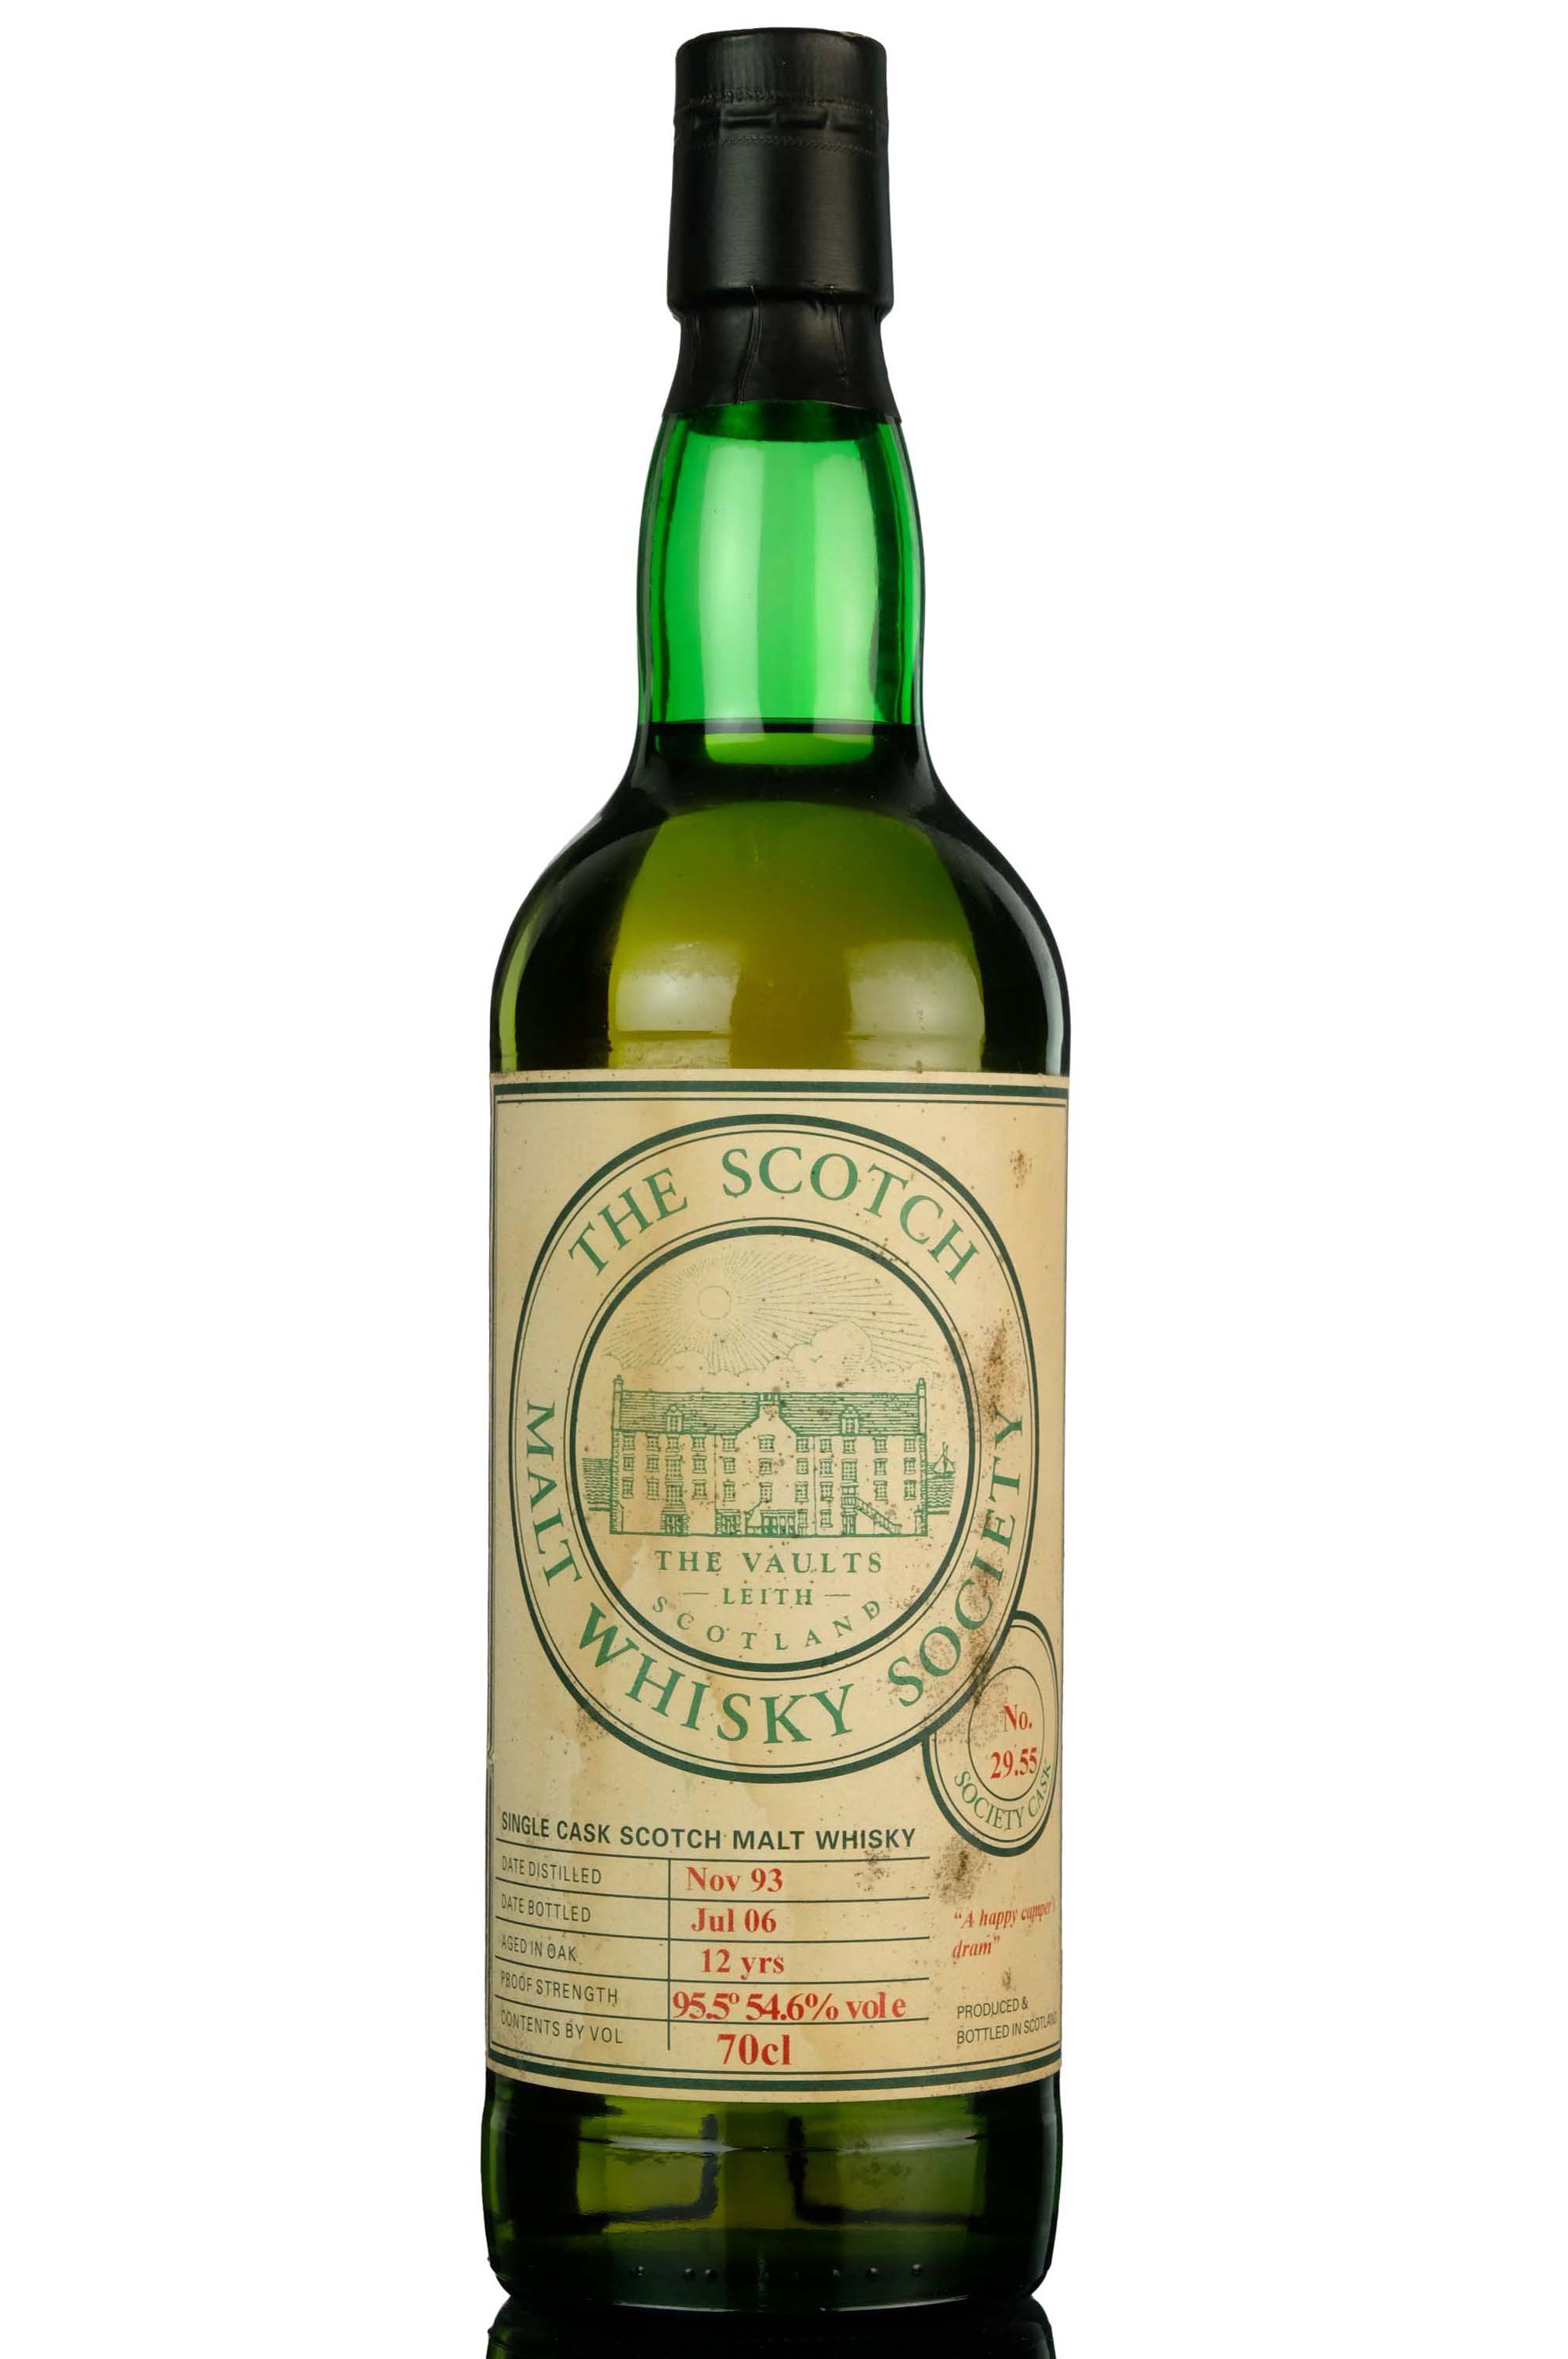 Laphroaig 1993-2006 - 12 Year Old - SMWS 29.55 - A Happy Campers Dram